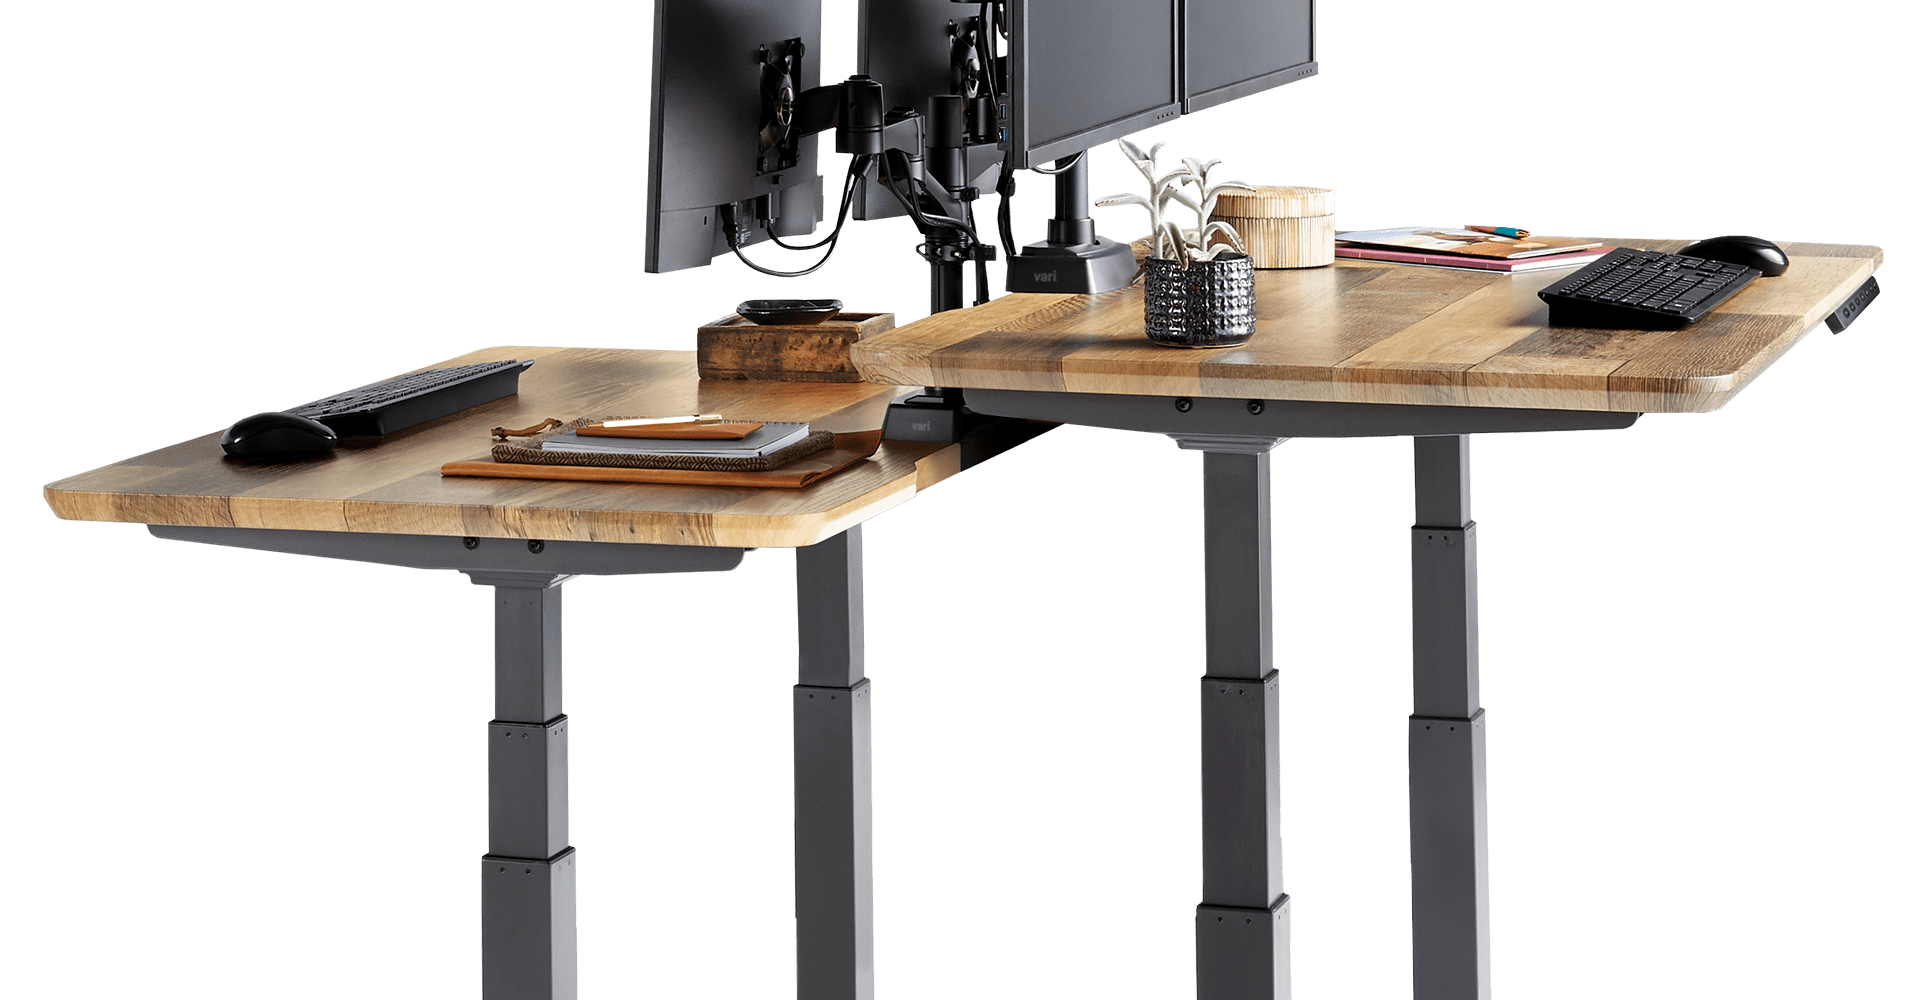 standing desk and varidesk converters are great solutions for your workspace